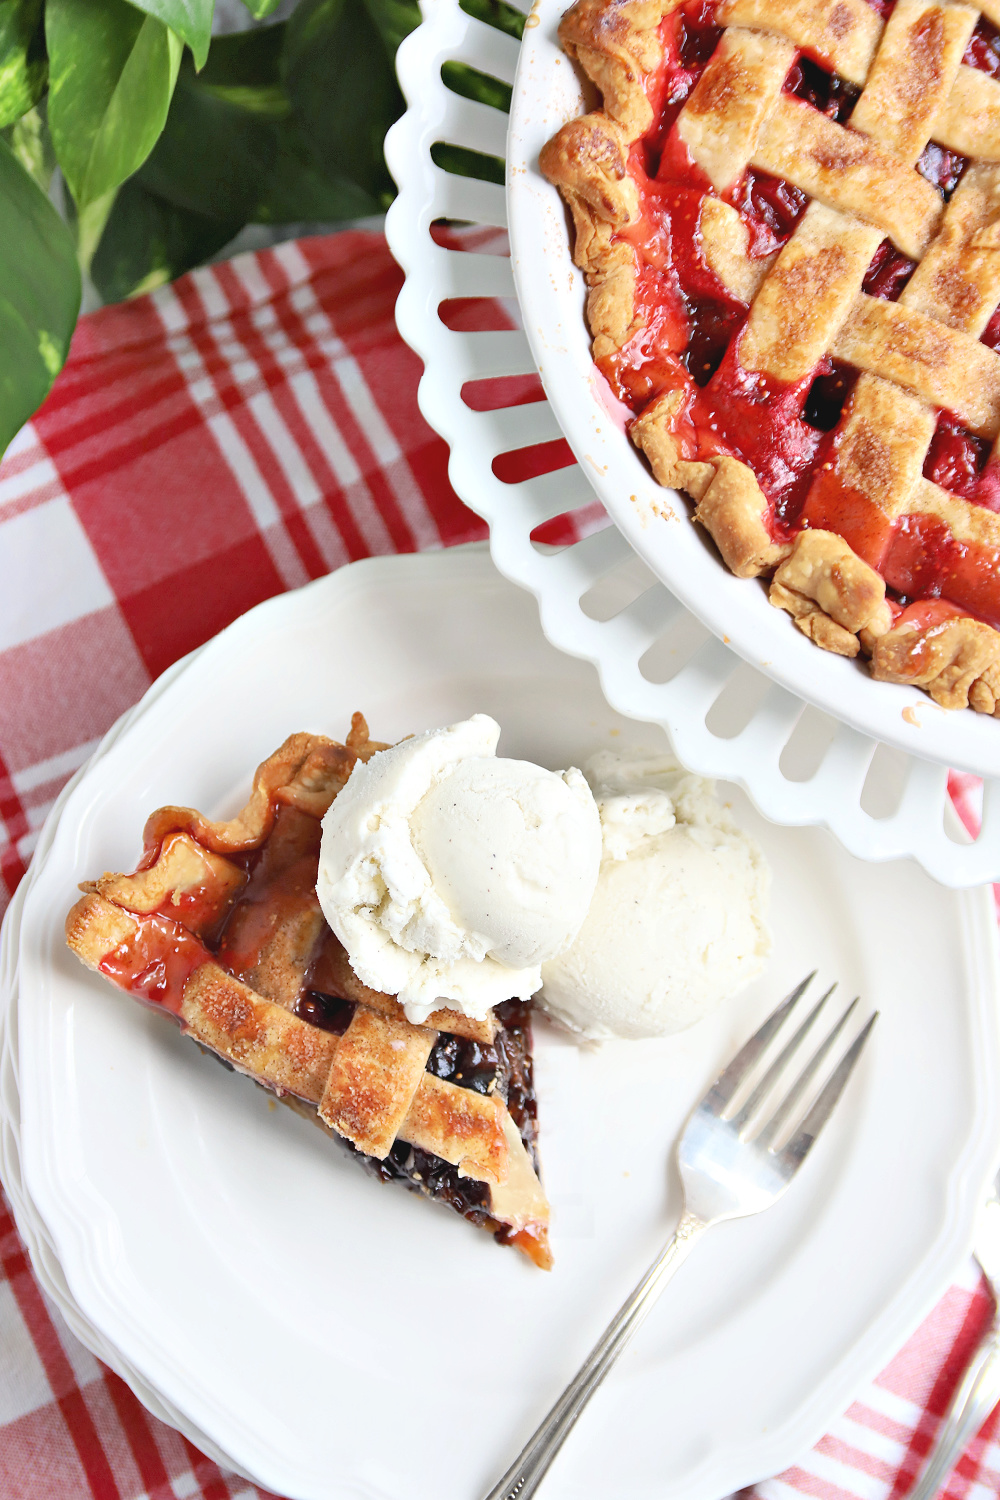 A slice of cranberry and fig pie with the perfect balance of sweet and tart flavors. Easy recipe for this old-fashioned dessert with how-to instructions for making the pretty lattice top crust.